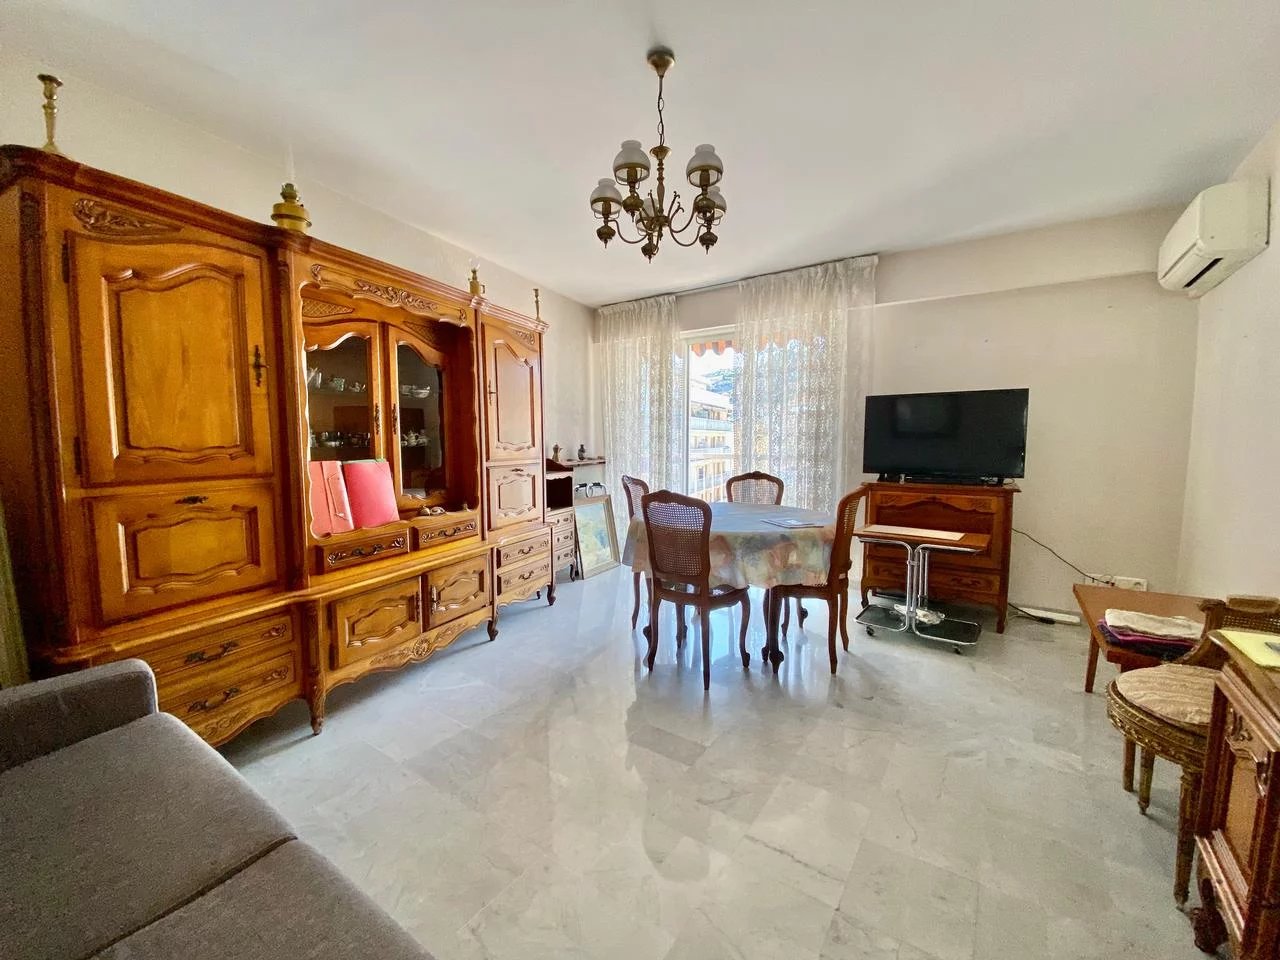 Appartement  3 Rooms 61.4m2  for sale   270 000 €